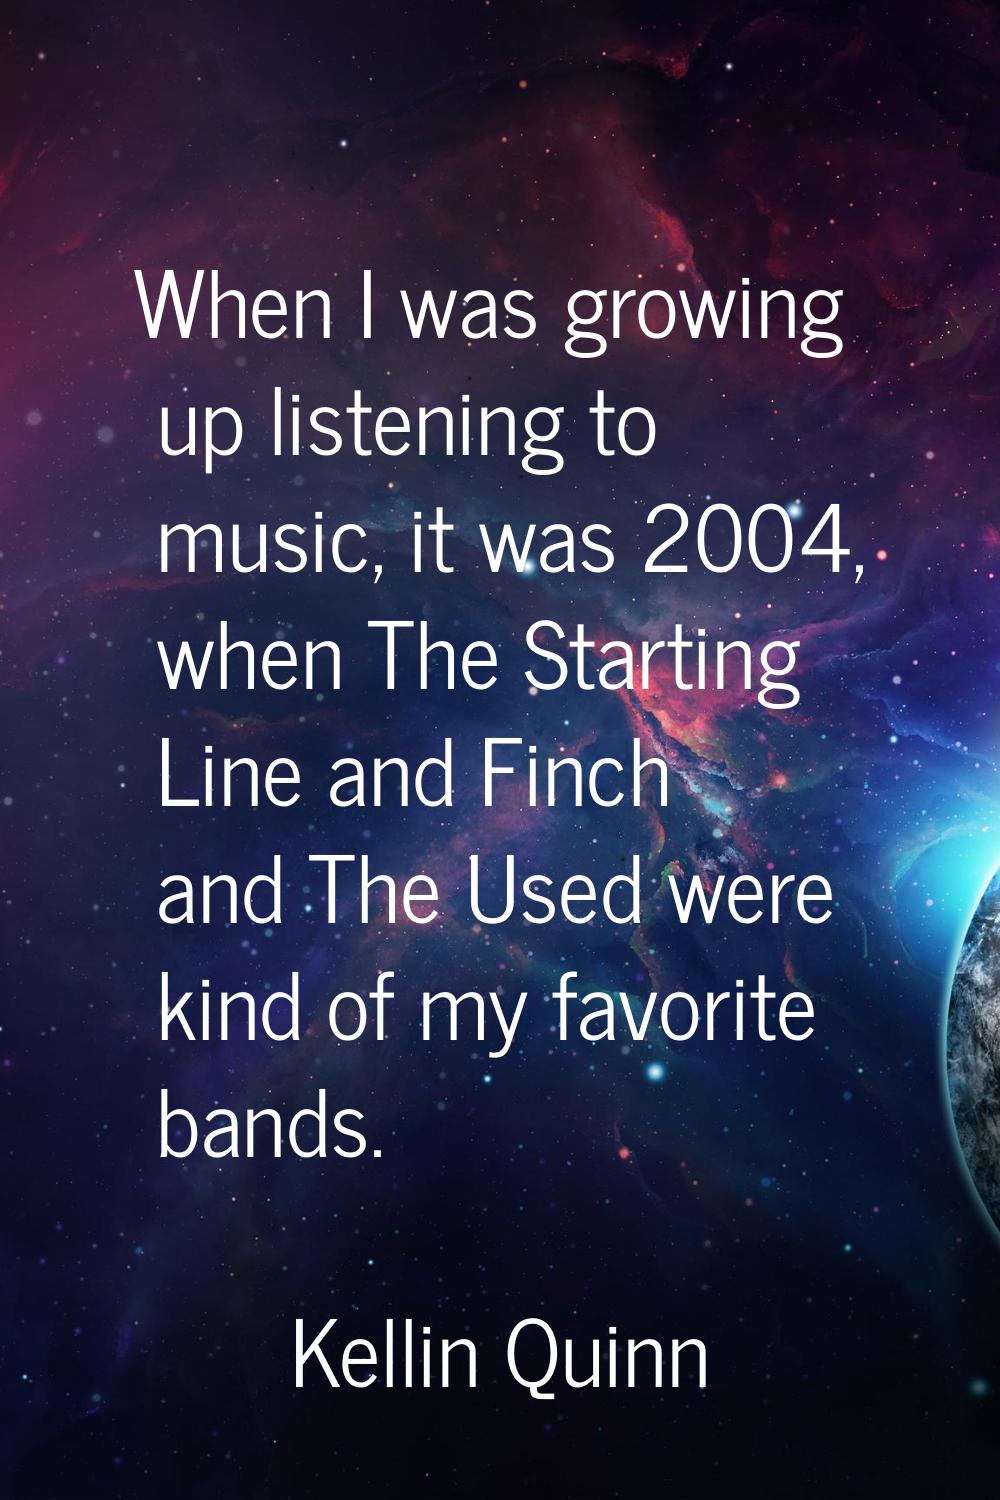 When I was growing up listening to music, it was 2004, when The Starting Line and Finch and The Use